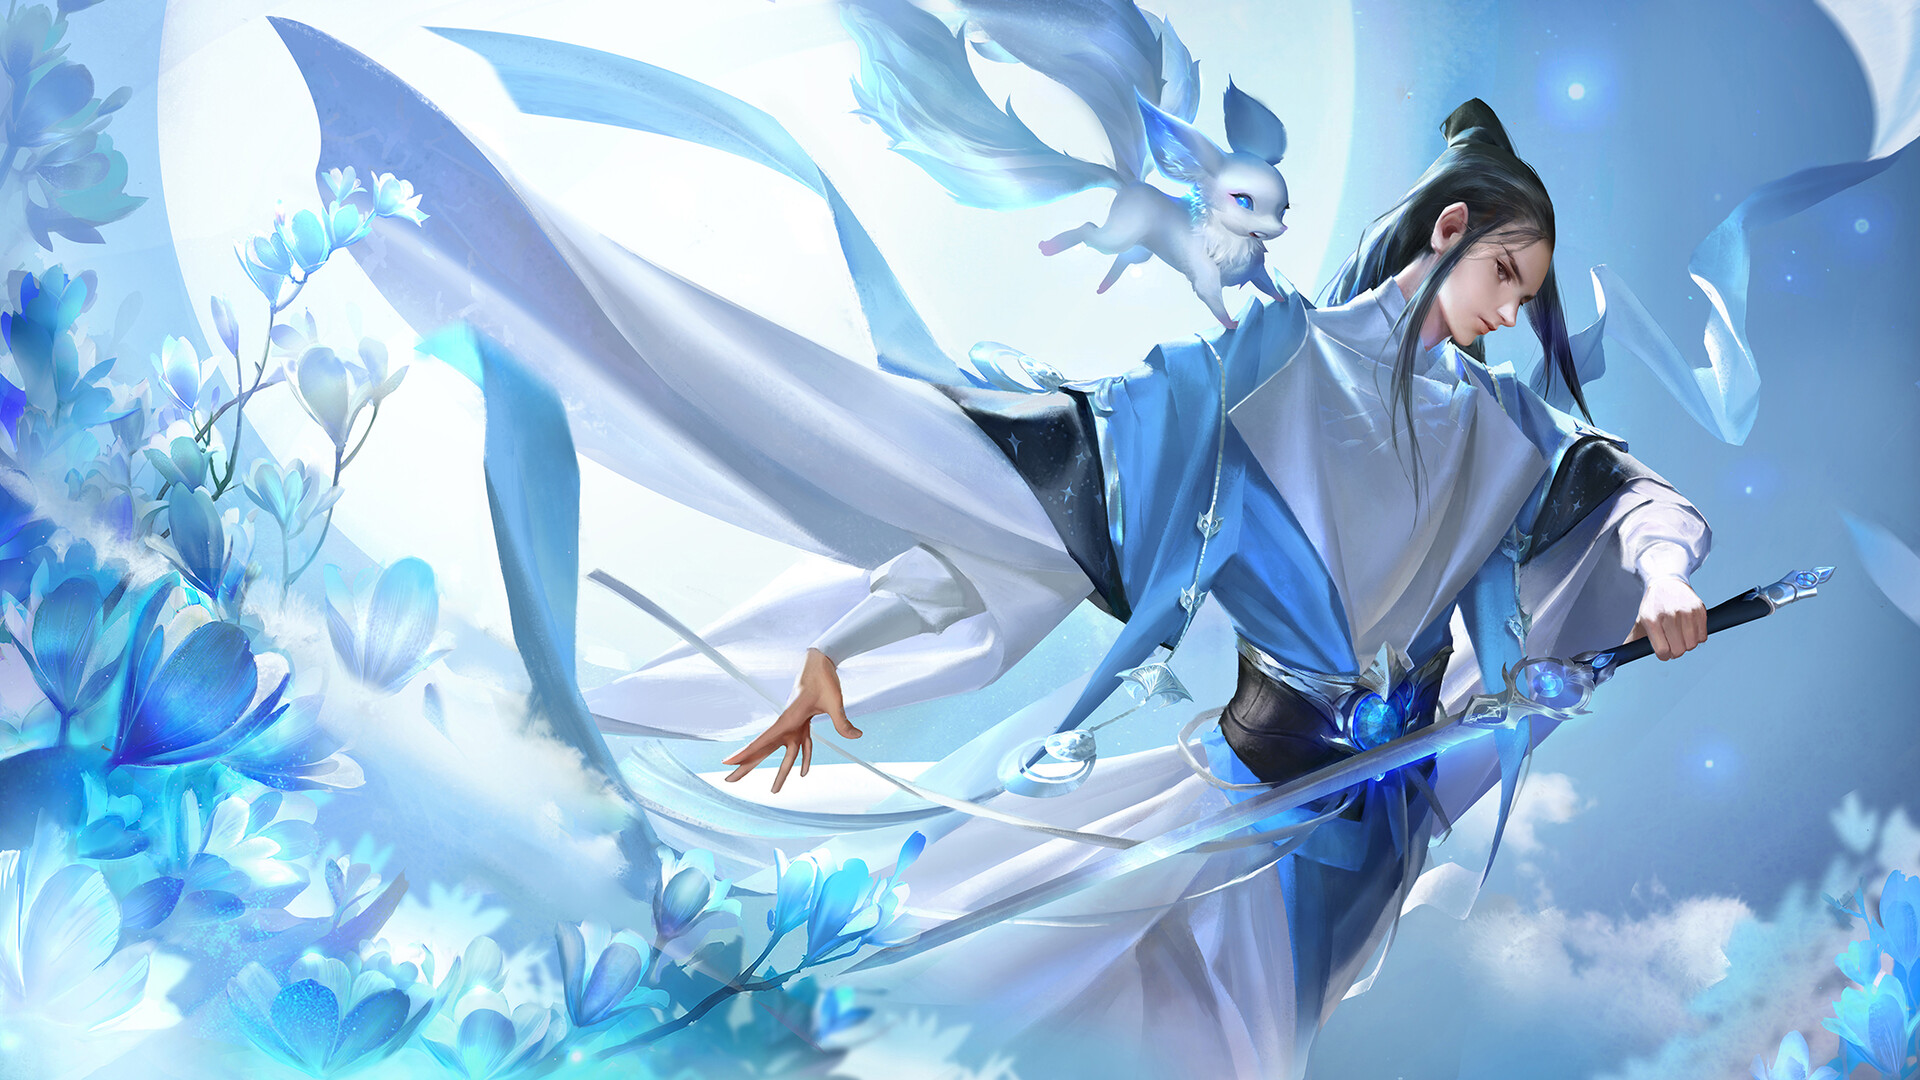 Video Game The Fate Of Swordsman HD Wallpaper | Background Image